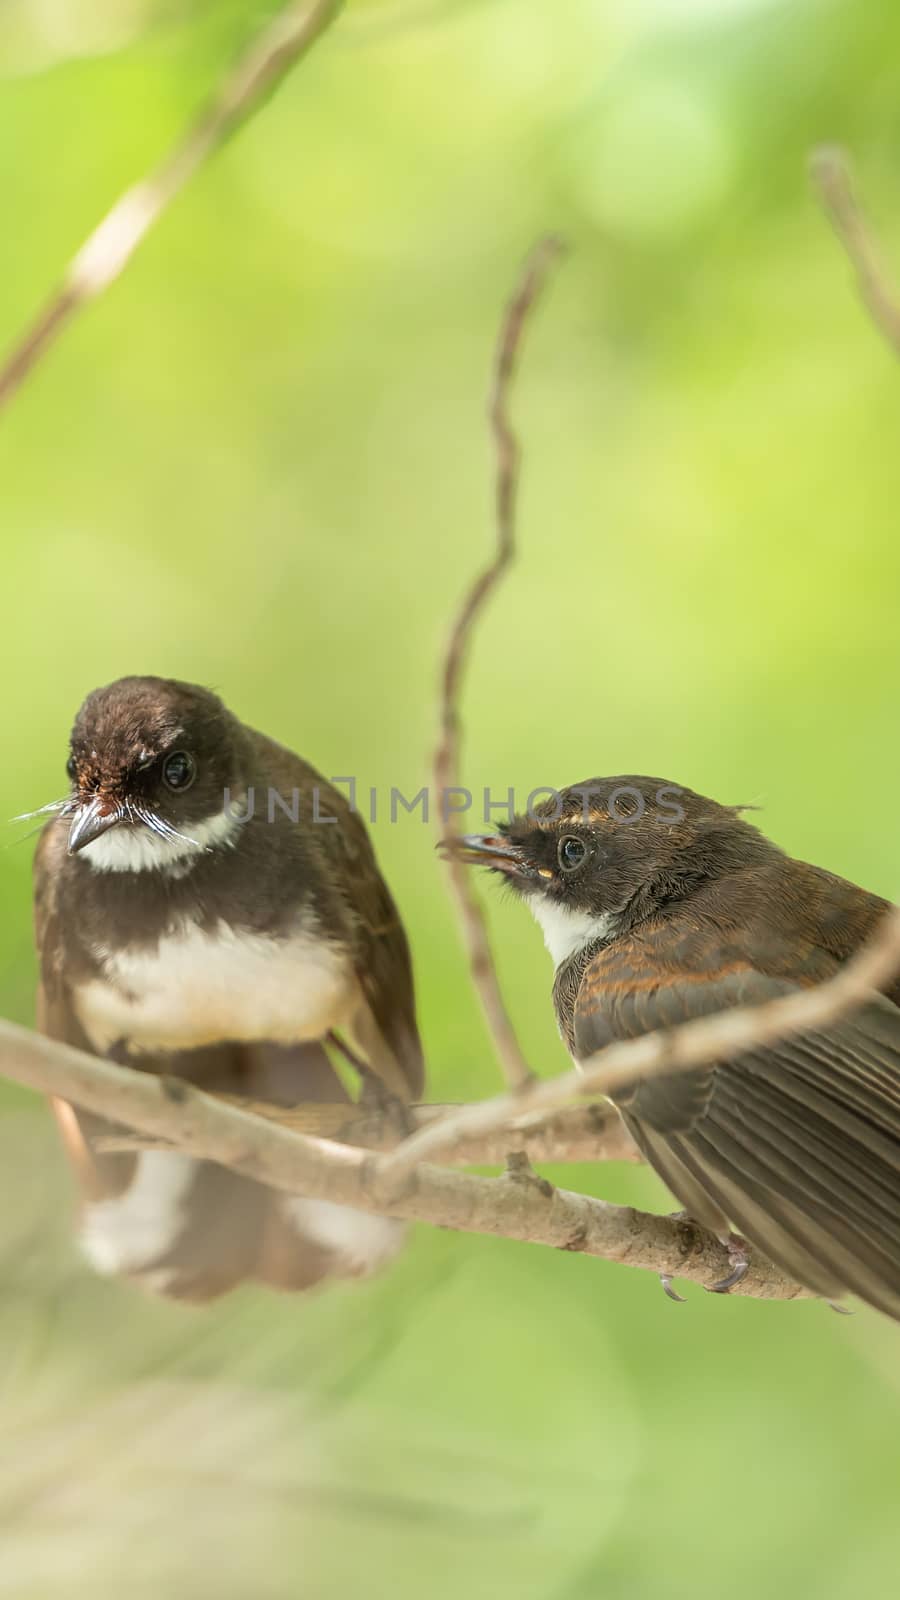 Two birds (Malaysian Pied Fantail, Rhipidura javanica) black and white color are couple, friends or brethren perched on a tree in a nature wild